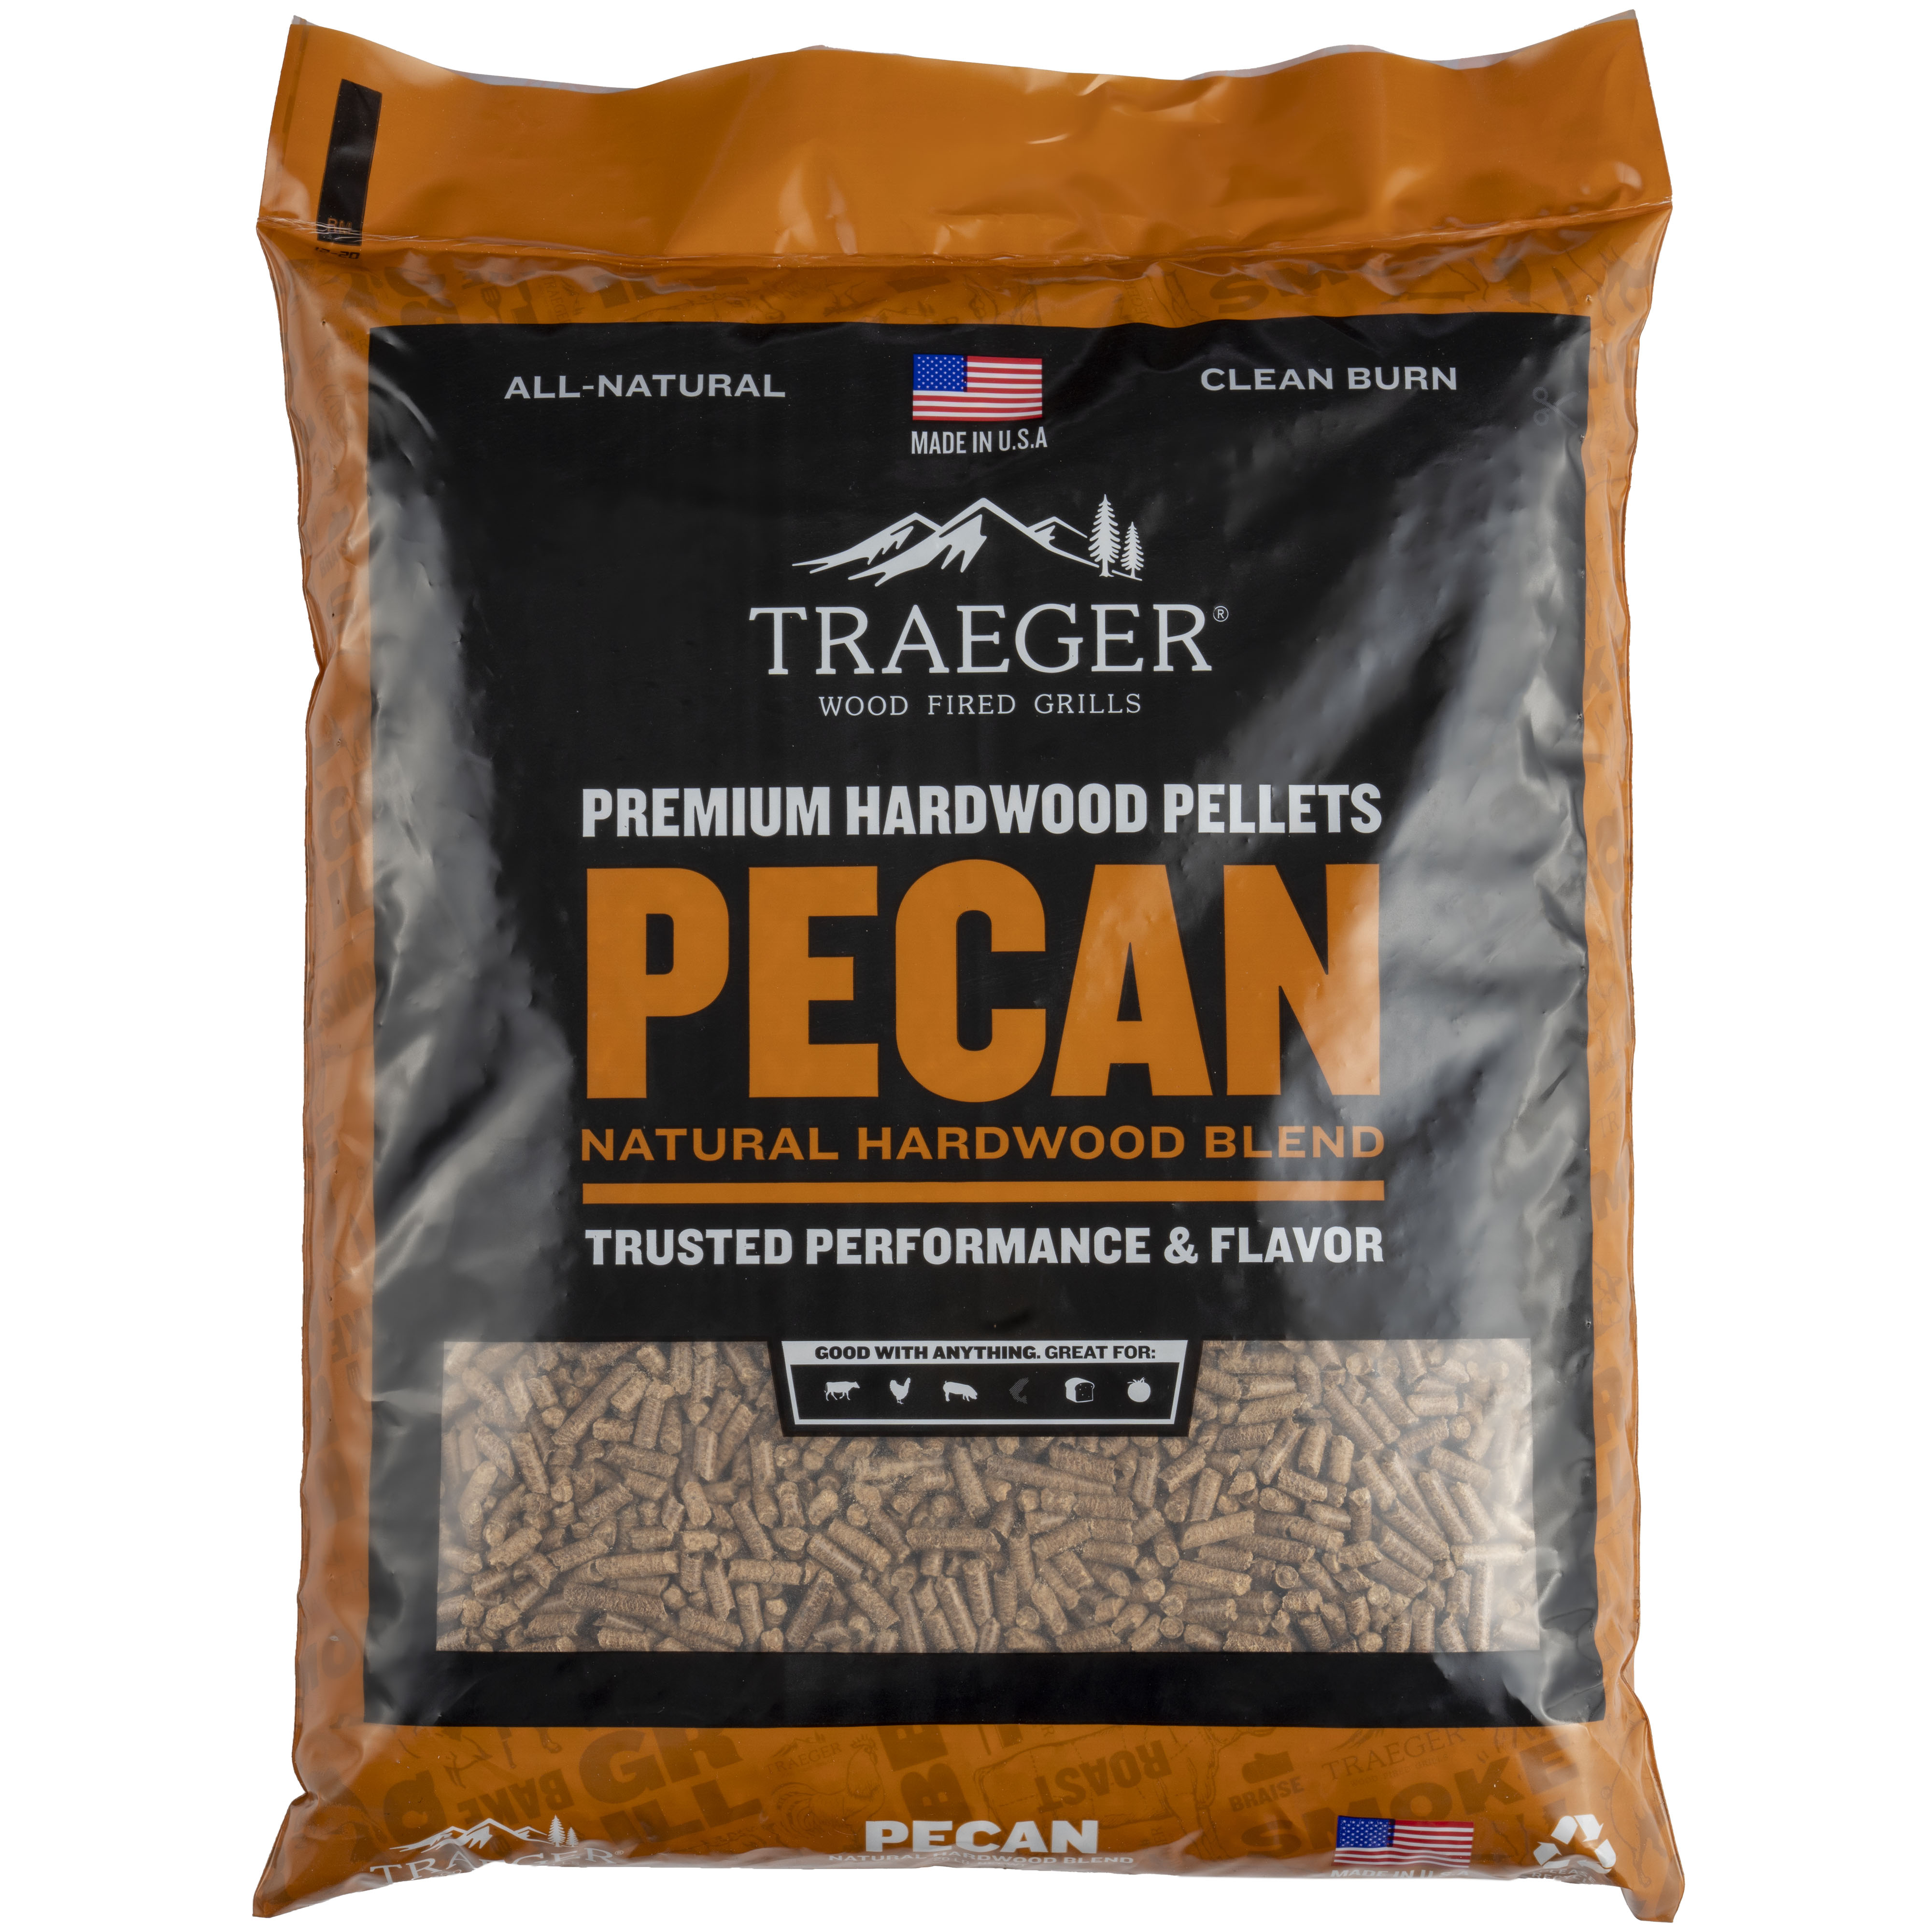 /assets/images/products/product-images/S6Z2Y3MKBF71R/647fa0b12fcaa_Pecan_Pellets_Studio_Front_WEB.jpg